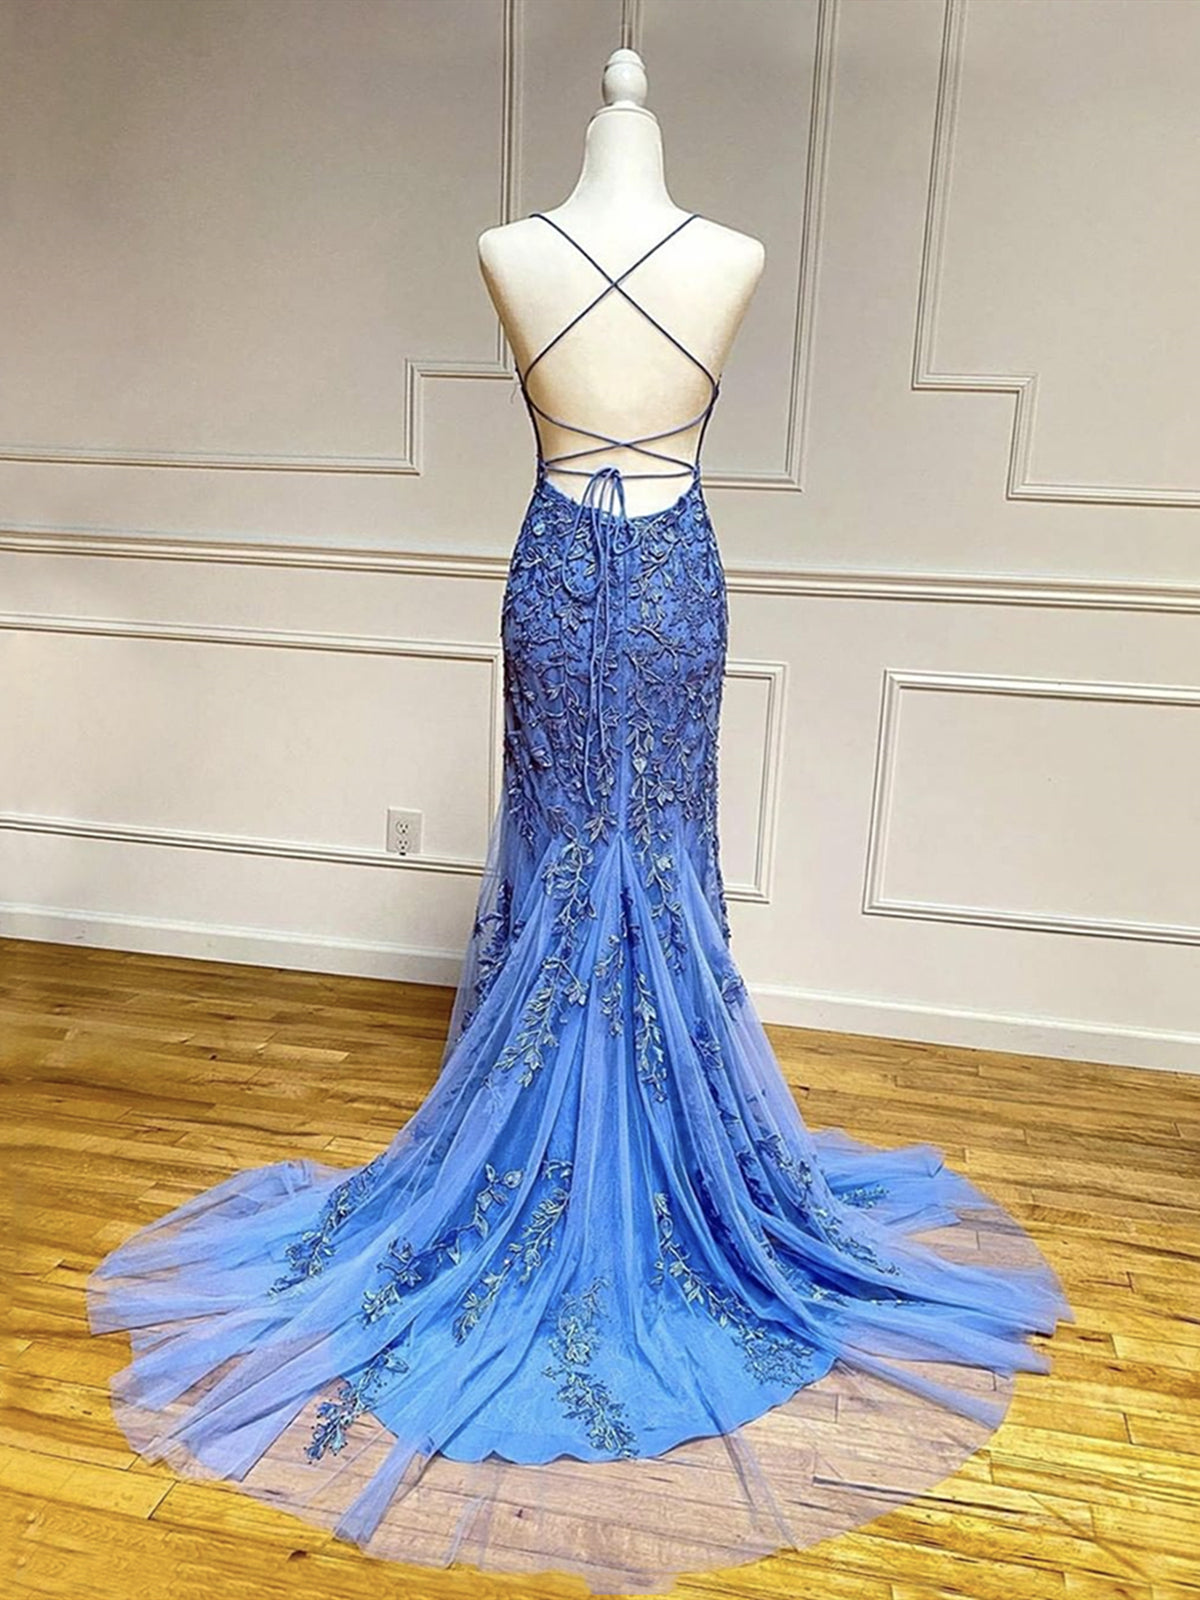 Homecoming Dresses 15 Year Old, Backless Blue Lace Prom Dresses, Open Back Blue Lace Formal Graduation Dresses